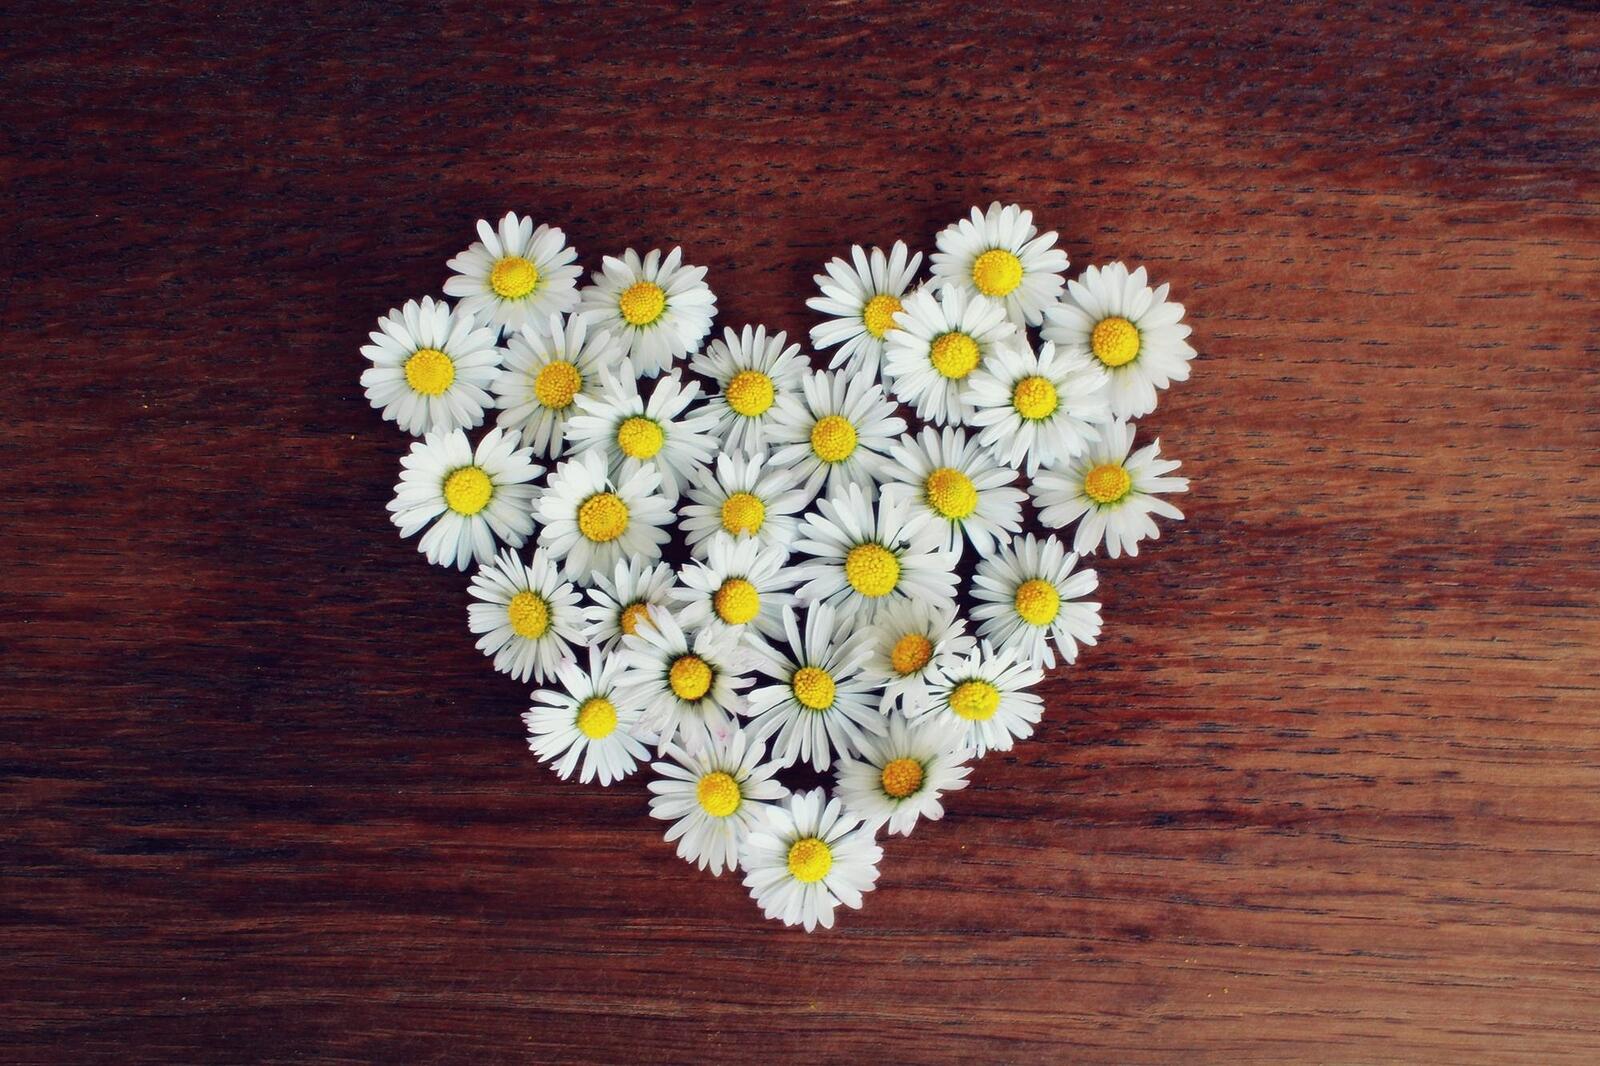 Free photo A heart made of daisies.